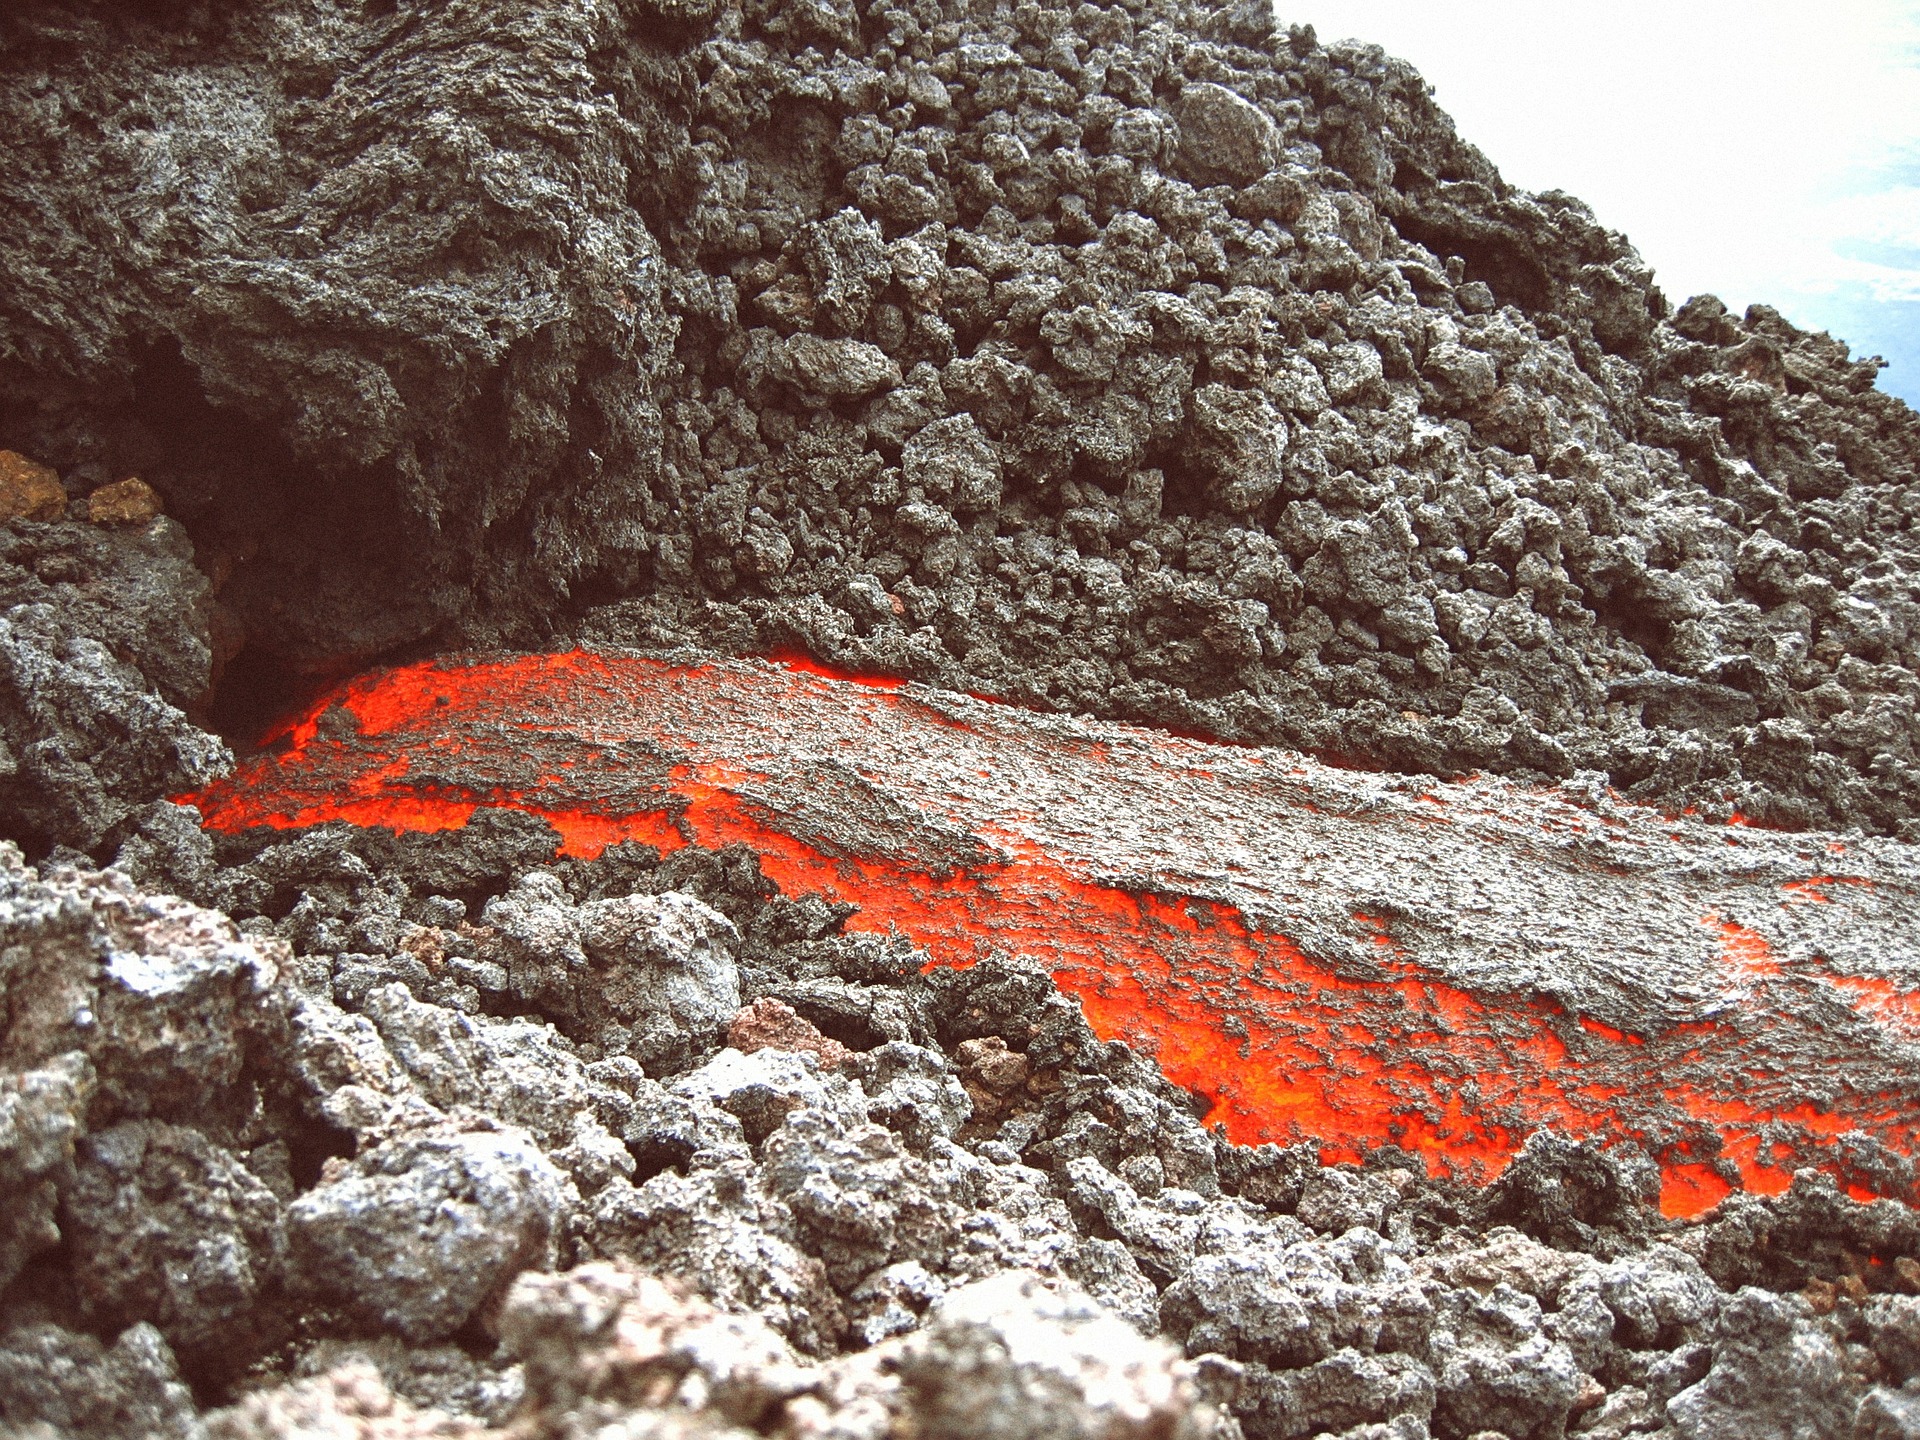 Molten magma from a volcano (Source: Life of Pix/Pixabay)